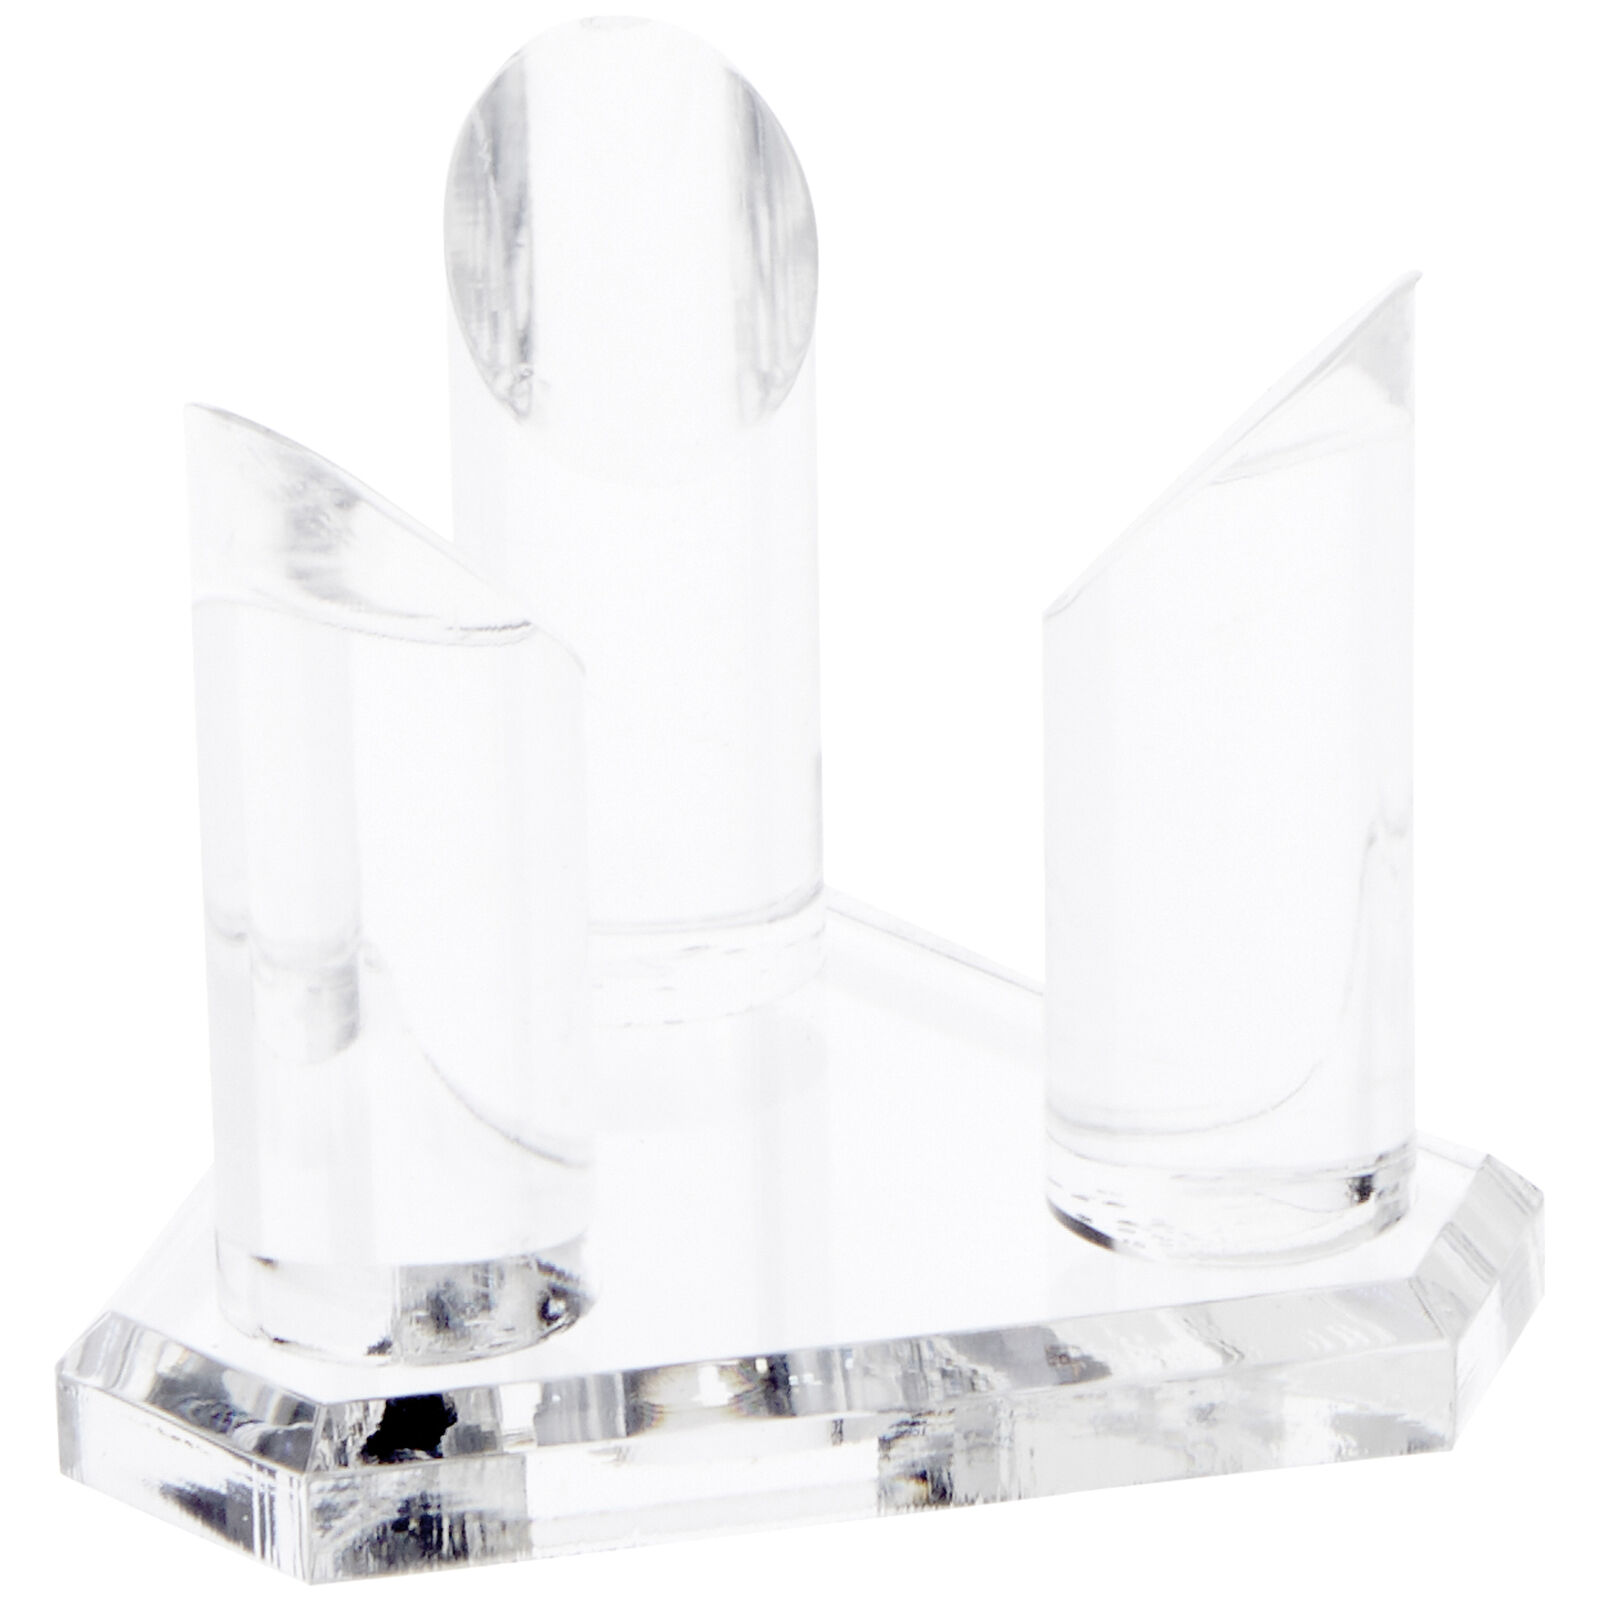 Plymor Acrylic Base W/ 3 Prongs For Ball, 2.375"h X 3.25"w X 2.75" 3 Pack